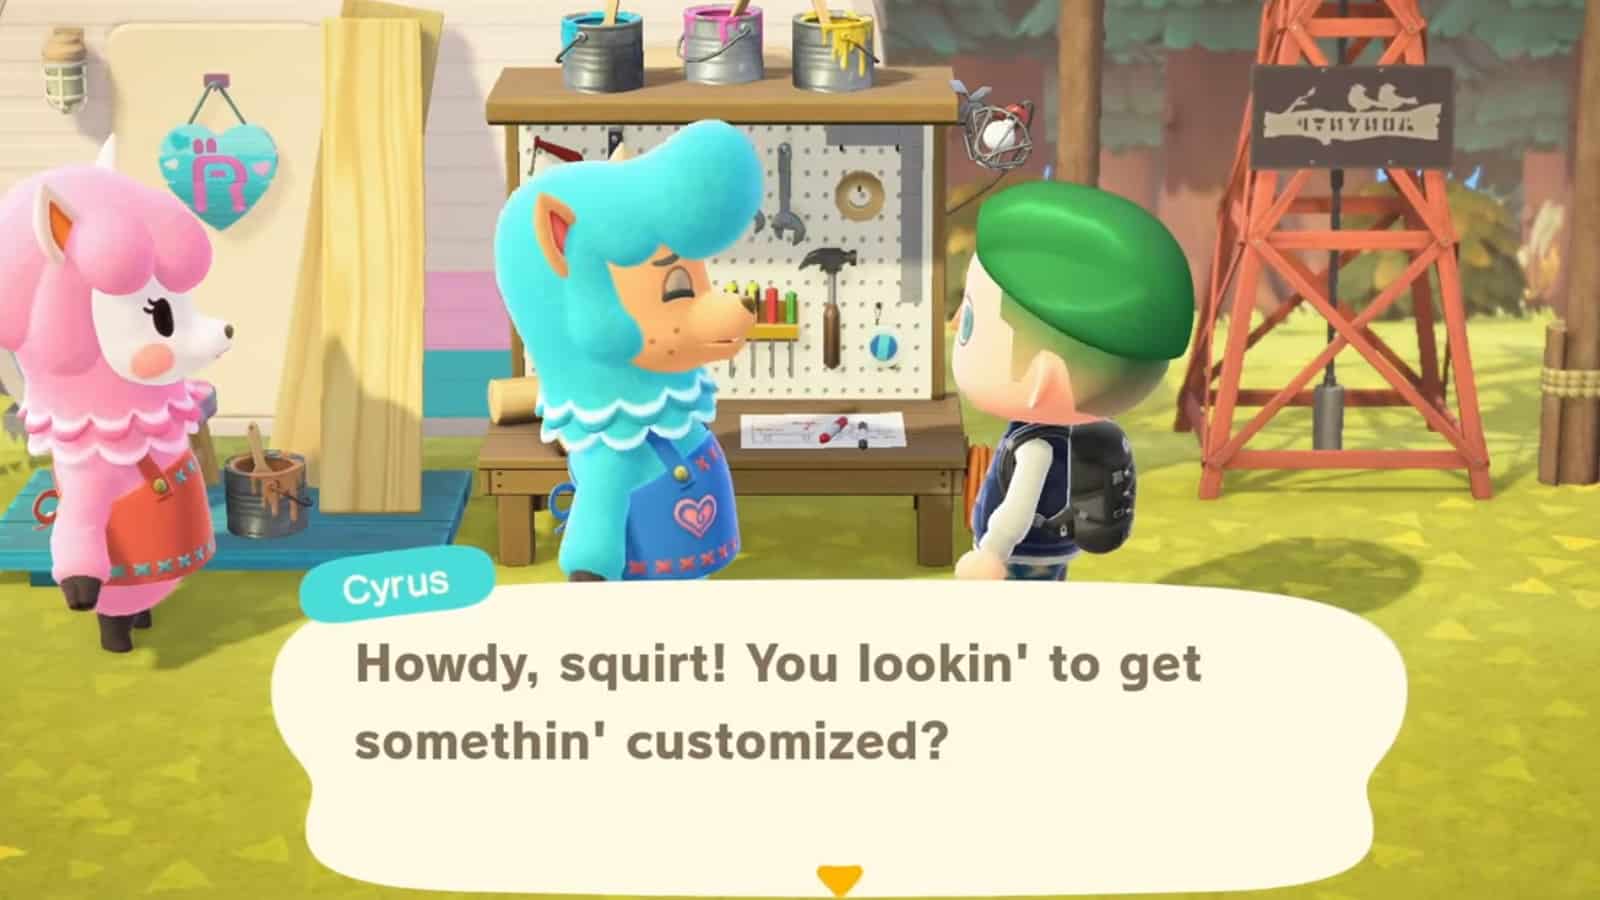 Animal Crossing New Horizons: How to Save Your Game